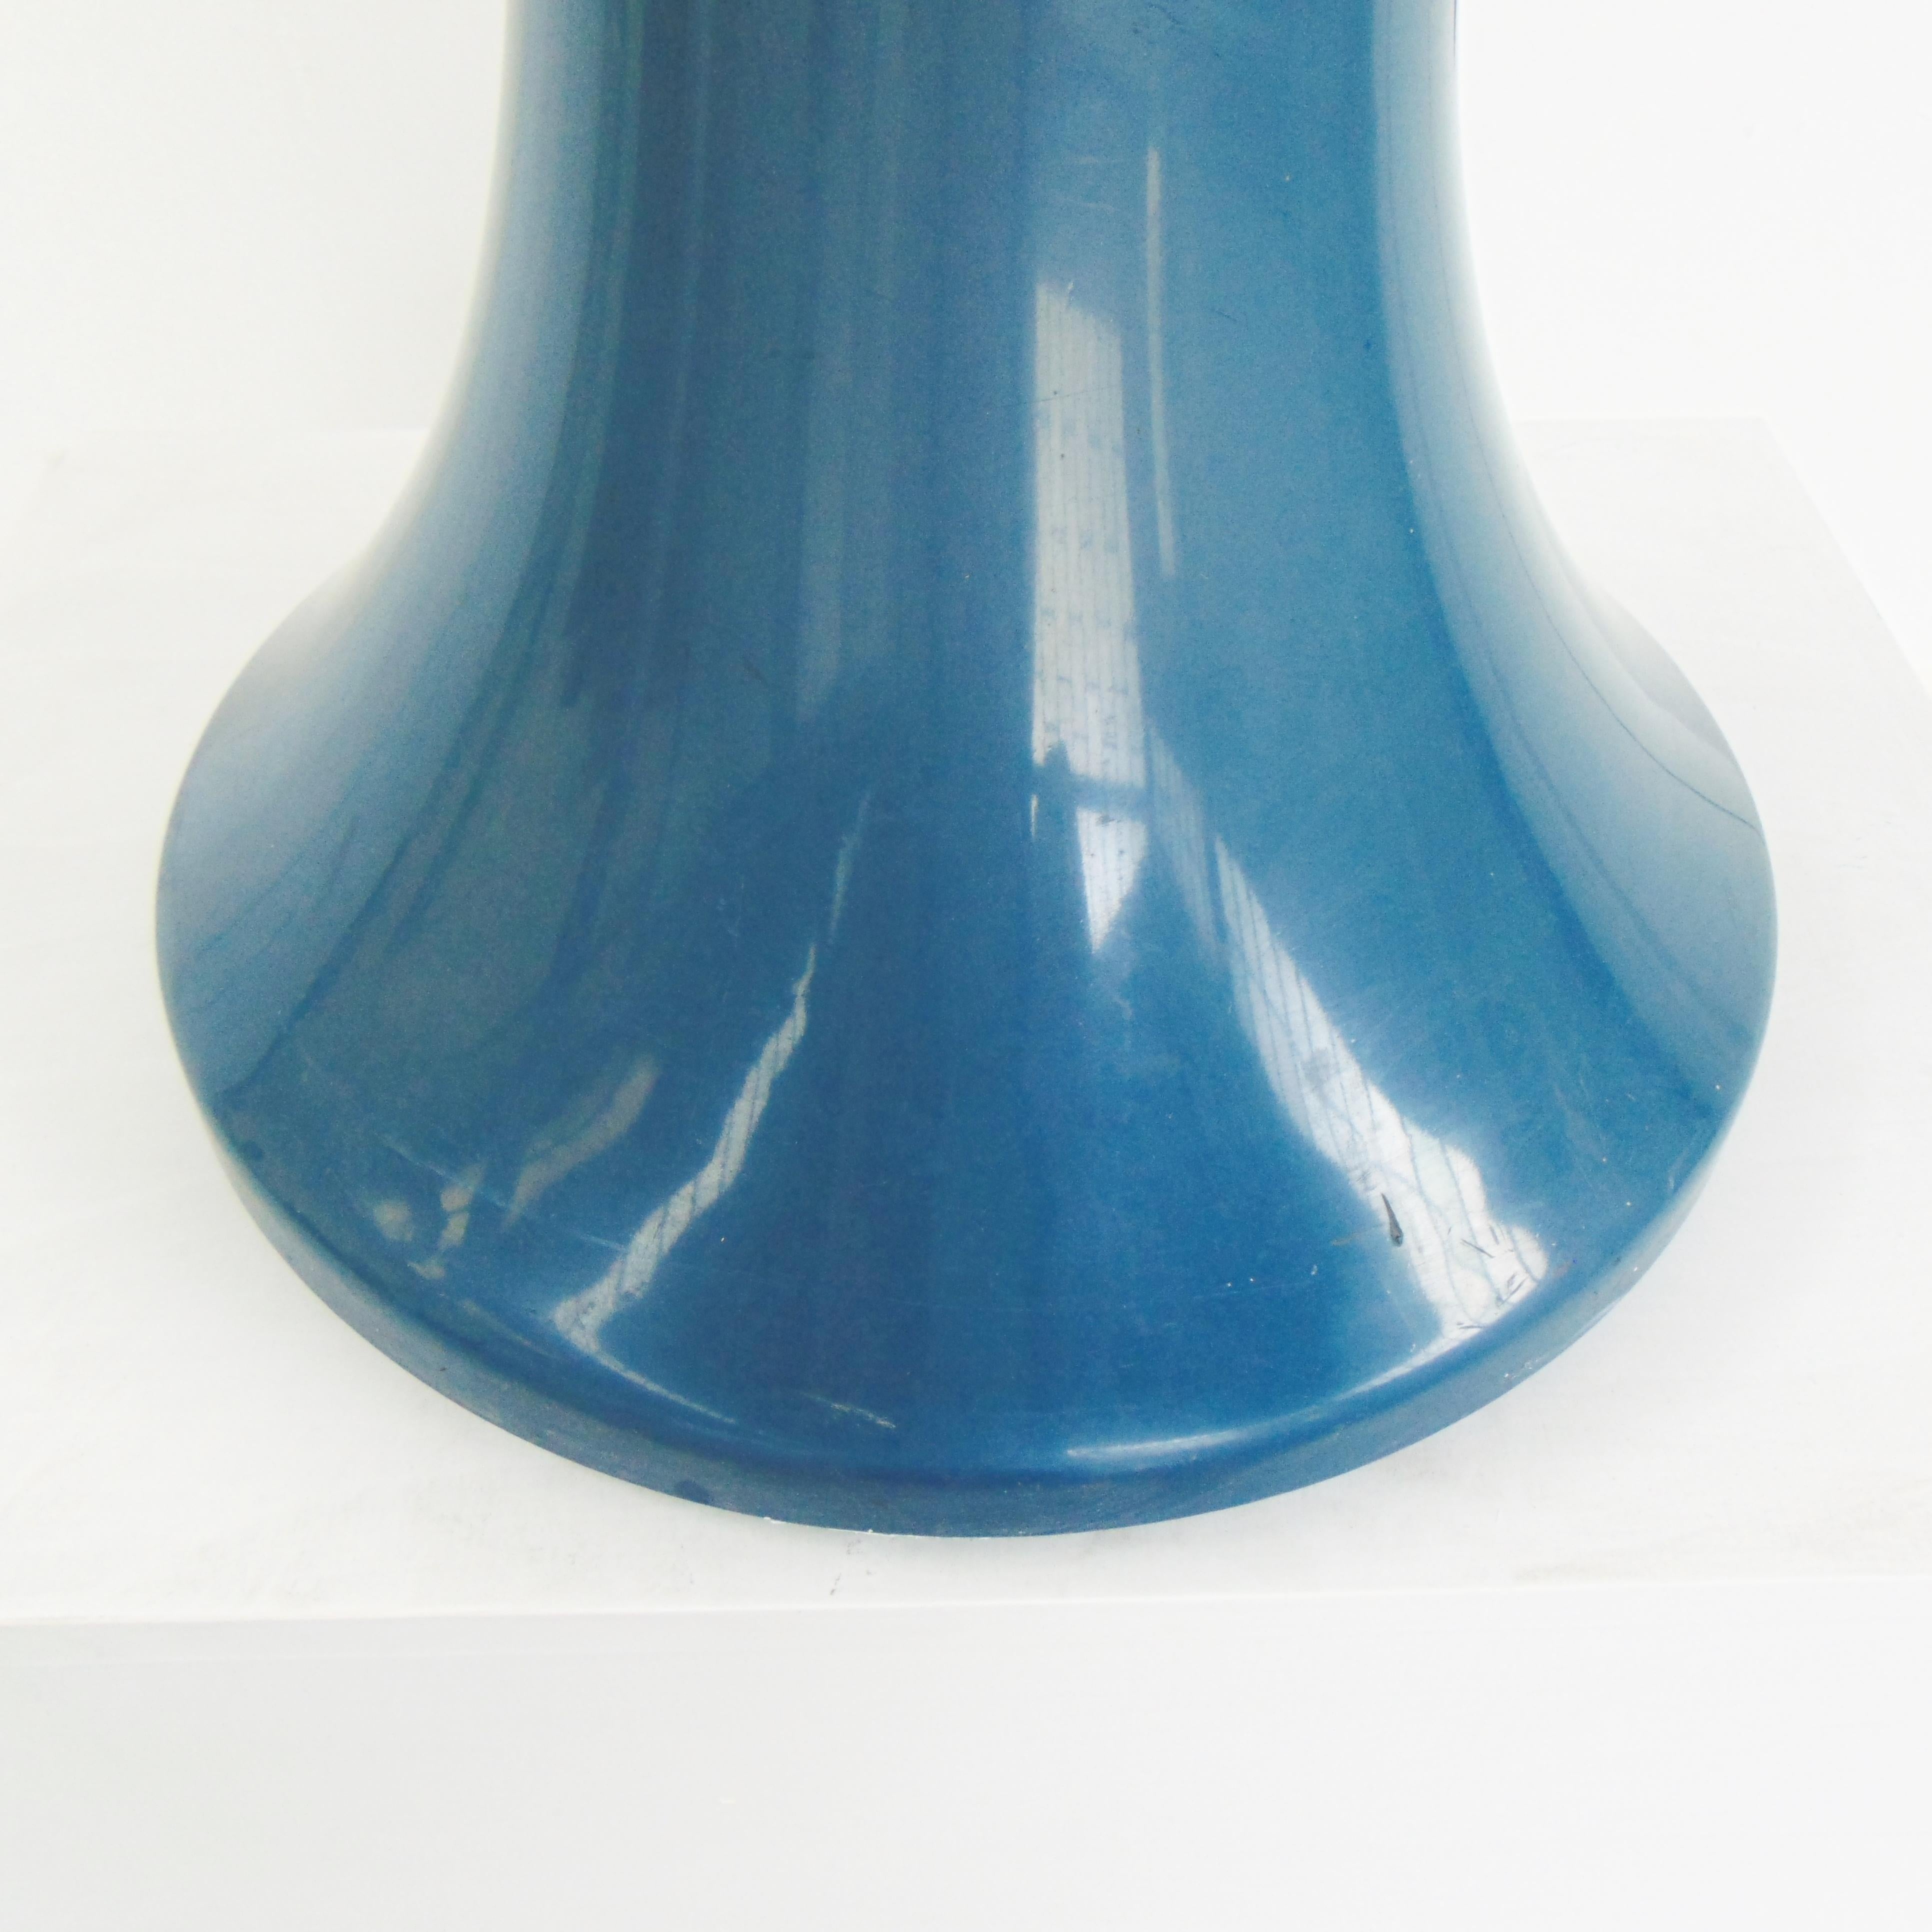 1972 Umbrella Stand in Blue Thermoformed Plastic by R. Lera for Sormani, Italy In Good Condition For Sale In Arosio, IT